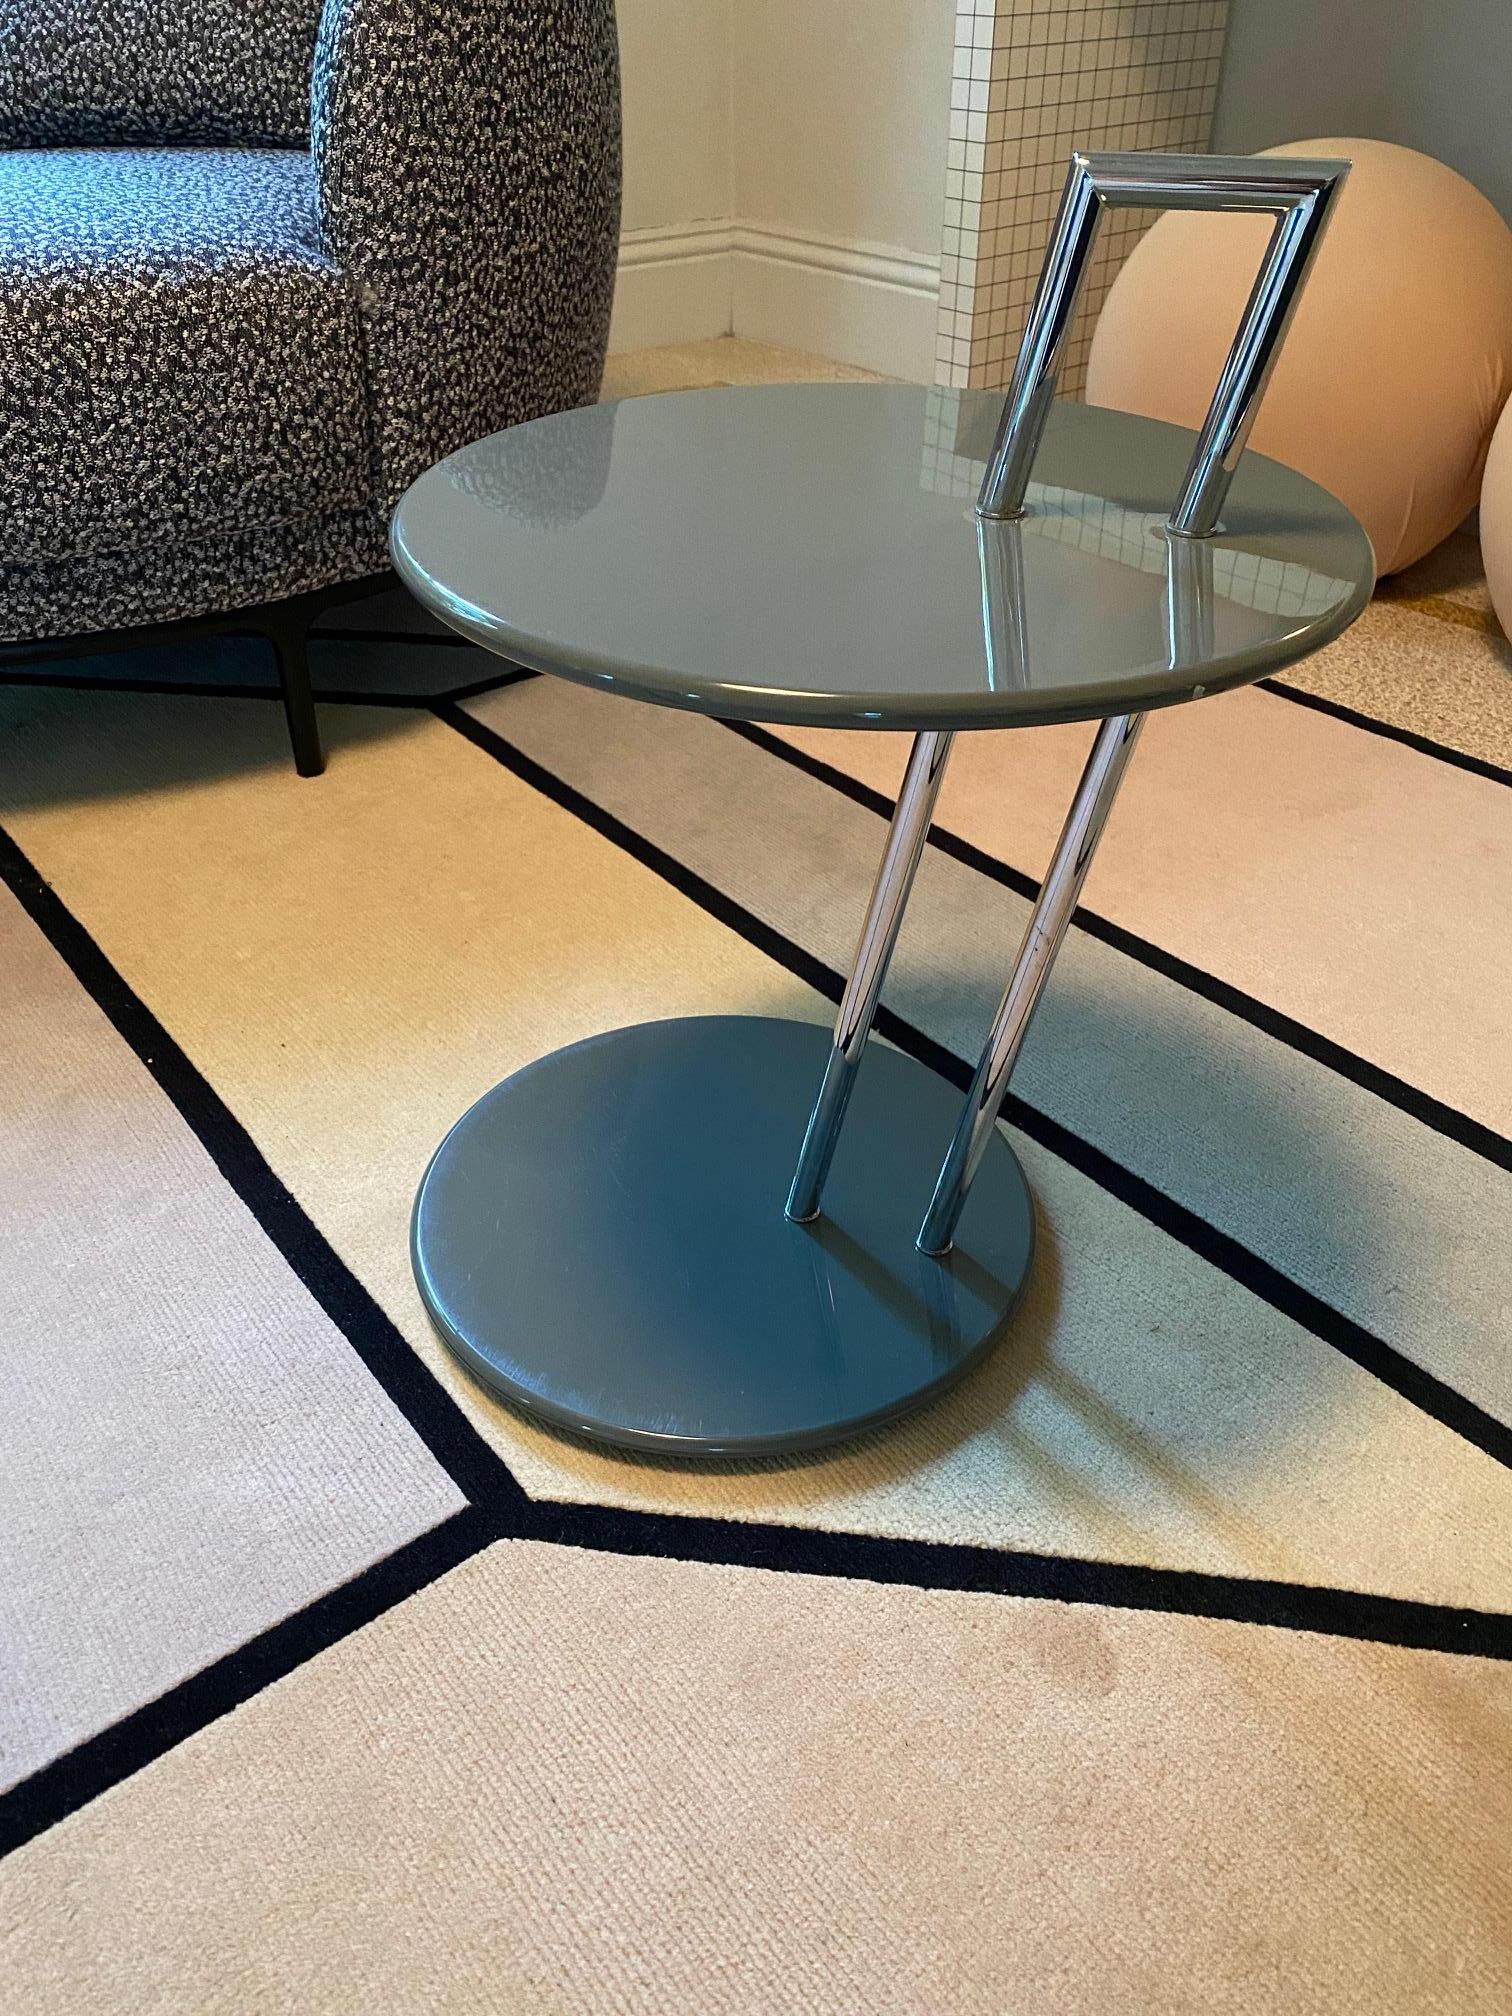 Base chrome-plated tubular steel. Round tabletop
The Latin for furniture, res mobiles, is based on the word mobile. Eileen gray took this very literally. She loved light, functional furniture that could be moved around easily. One can lift this